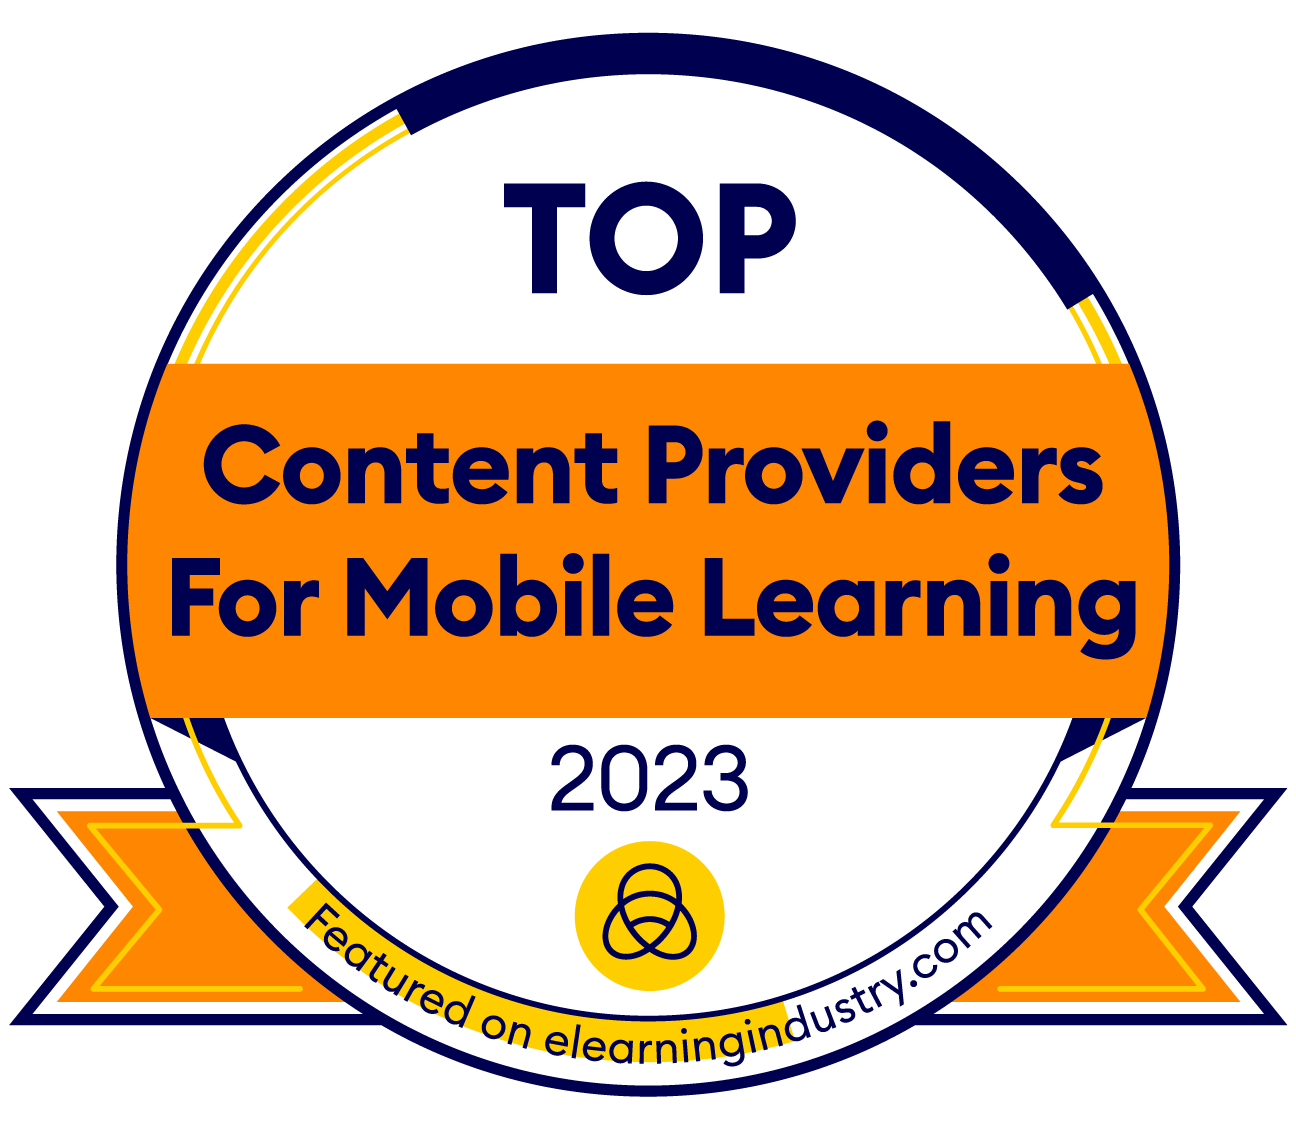 Top-Content-Providers-For-Mobile-Learning-2023-CommLab-India